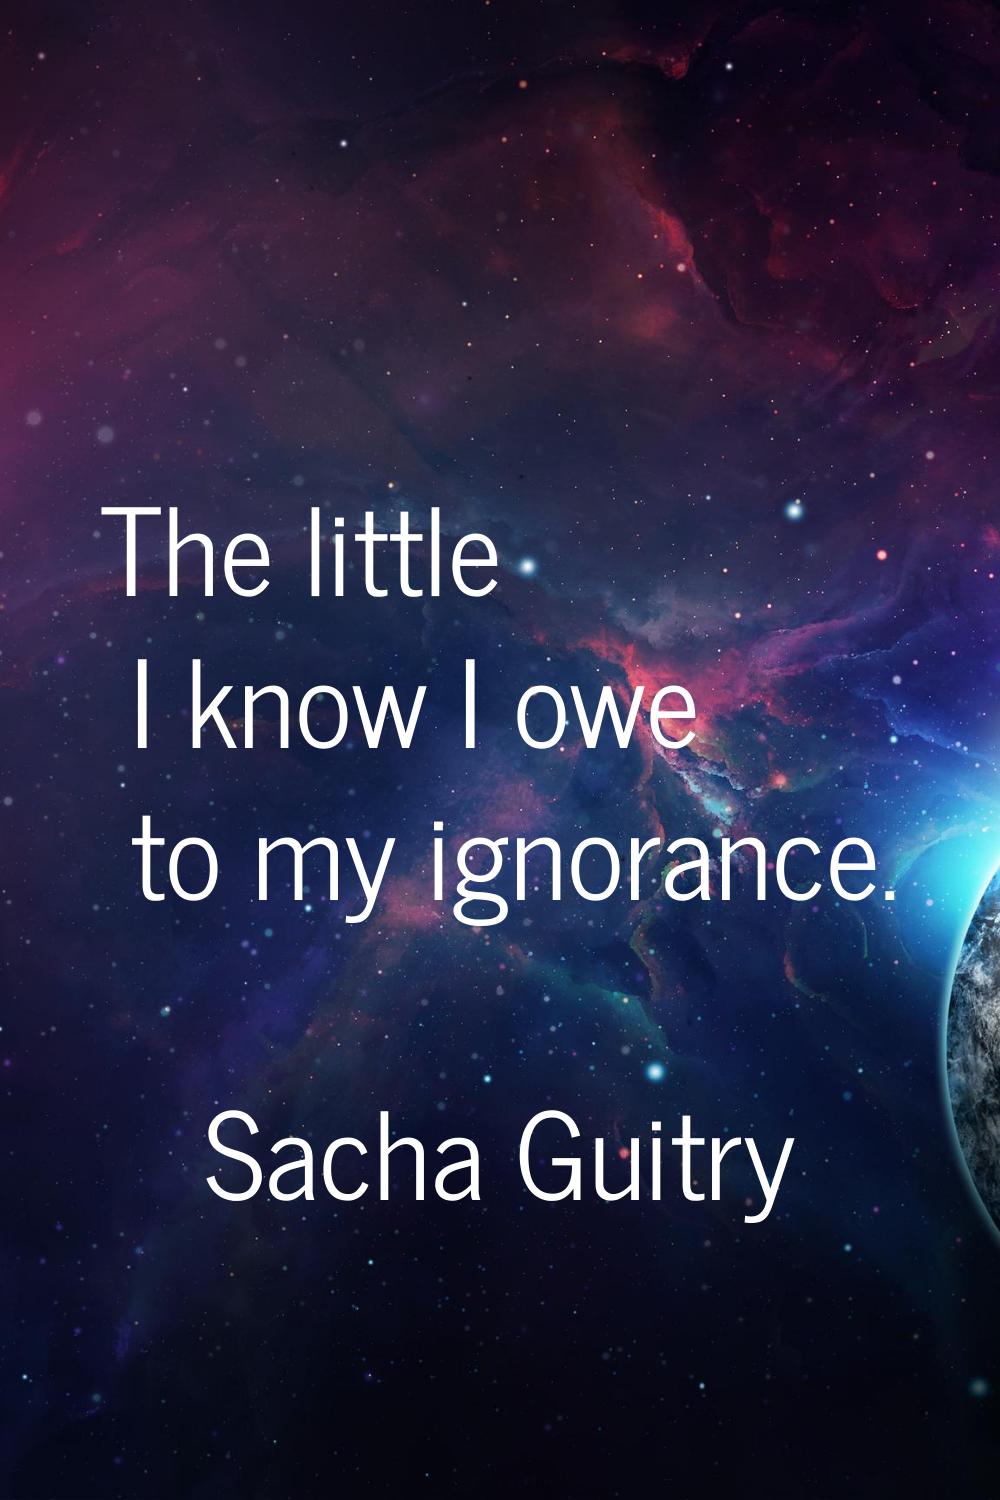 The little I know I owe to my ignorance.